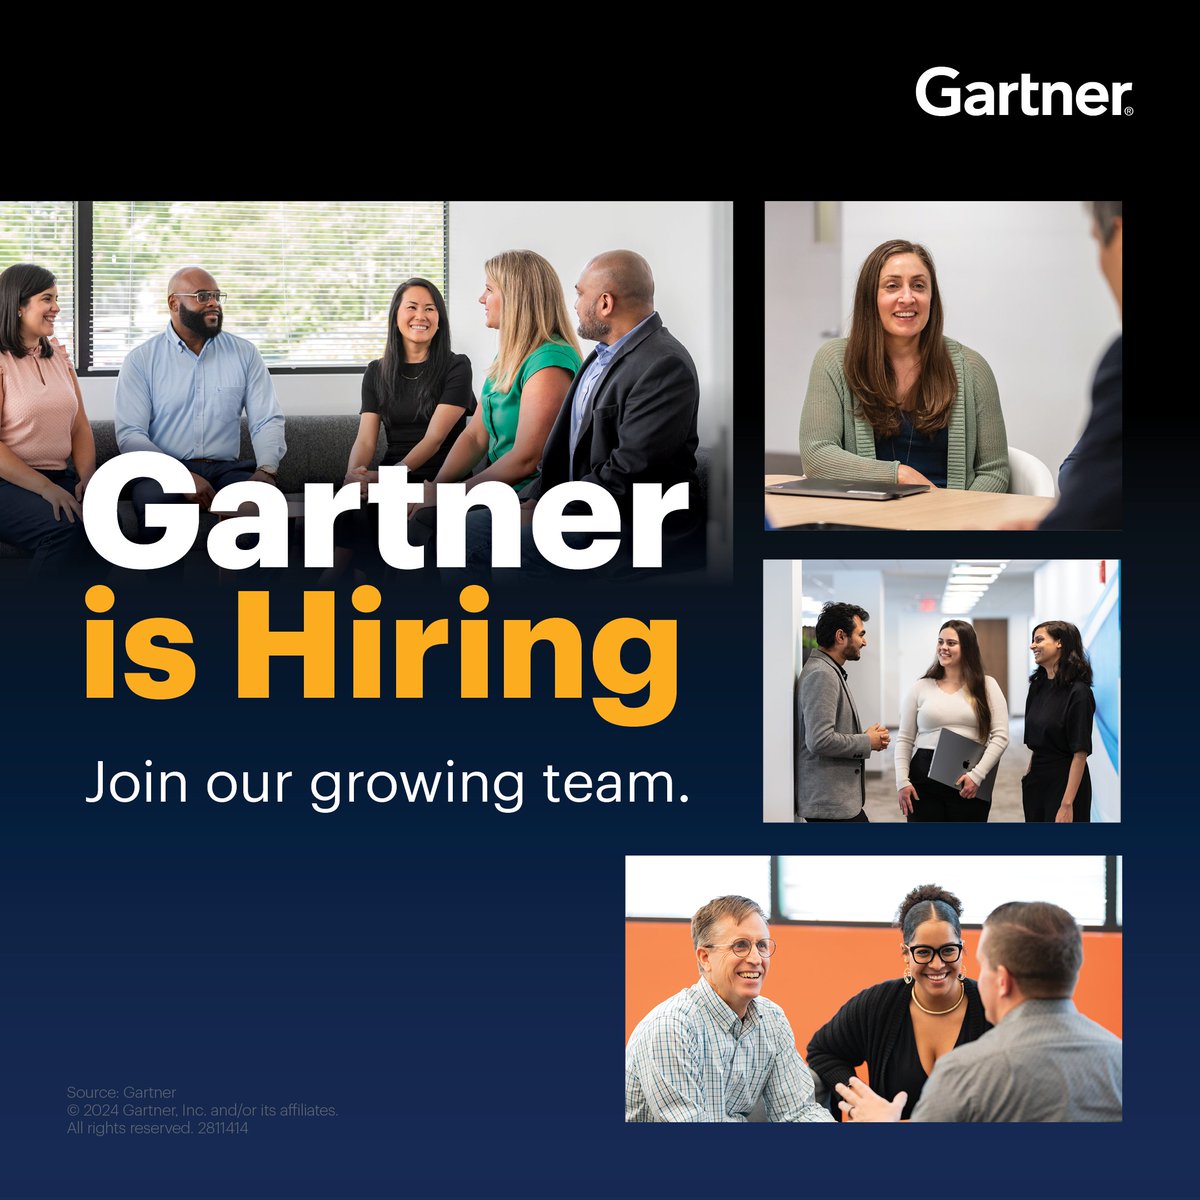 If you are driven by a desire to make a change, solve interesting problems and work with one of the best teams in the world, check out some open opportunities 👉 gtnr.it/4aPA4Q1

#Hiring #LifeAtGartner